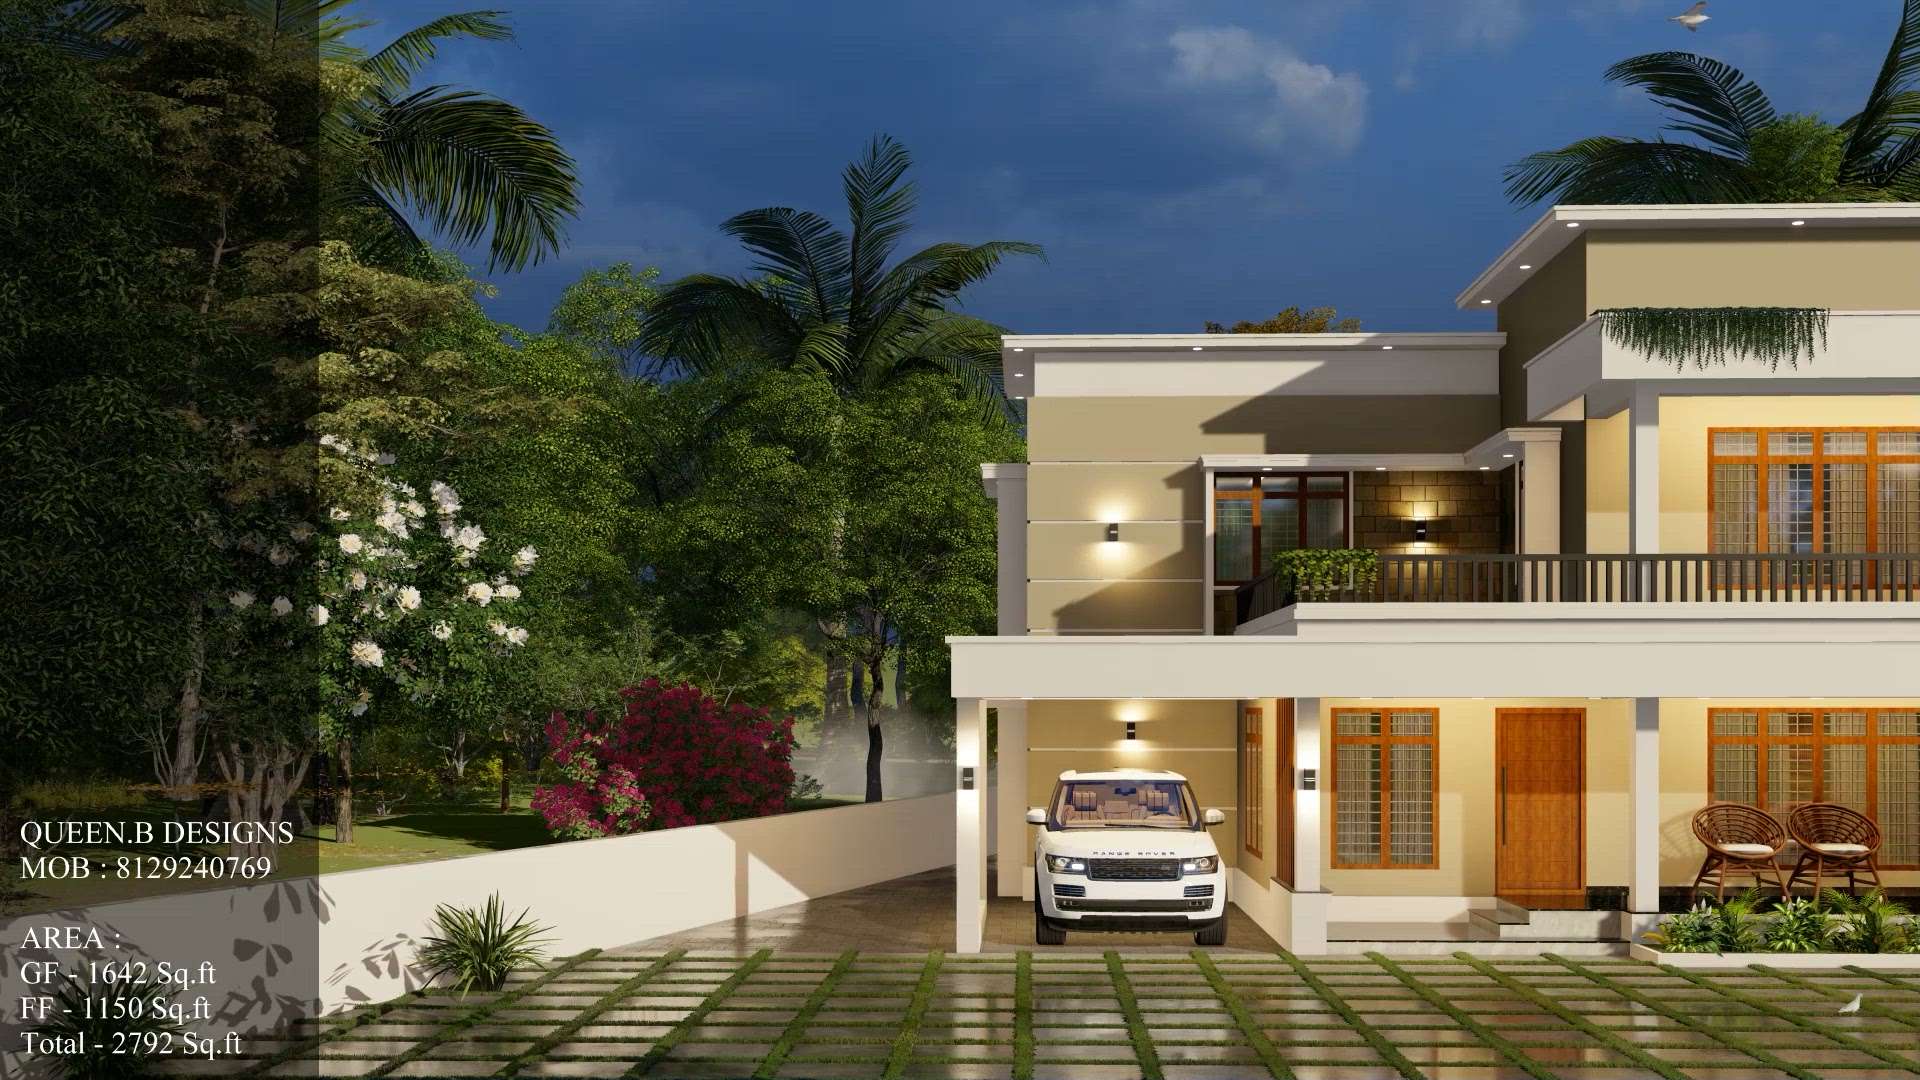 Elegance of Contemporary Style
Designed by,
Queen.B Designs
Mannuthy, Thrissur
Contact: 8129240769

#budgethomes #budget_home  #budgethome  #budget-home  #3d_exterior  #3dmodeling  #3D_ELEVATION  #3dhouse  #3delivation  #3Delevation  #3dbuilding  #3delevationhome  #3Darchitecture  #3Dexterior  #exterior_Work  #exteriordesigns  #exteriors  #exterior3D  #house_exterior_designs  #3d_exterior  #exterior_design  #ExteriorDesign  #HouseDesigns  #ContemporaryHouse  #SmallHouse  #KeralaStyleHouse  #SingleFloorHouse  #ElevationHome  #semi_contemporary_home_design  #home #3dhouse  #3D_ELEVATION  #3dbuilding  #3Darchitecture  #3Delevation  #3delevationhome  #design3D  #3Dexterior  #exteriordesigns  #exterior3D  #exterior_Work  #house_exterior_designs #ExteriorDesign  #HouseDesigns  #ContemporaryHouse #ElevationHome  #homedesignideas  #homedesignkerala  #ElevationHome  #ElevationDesign  #frontElevation  #elevationdesigns  #3D_ELEVATION